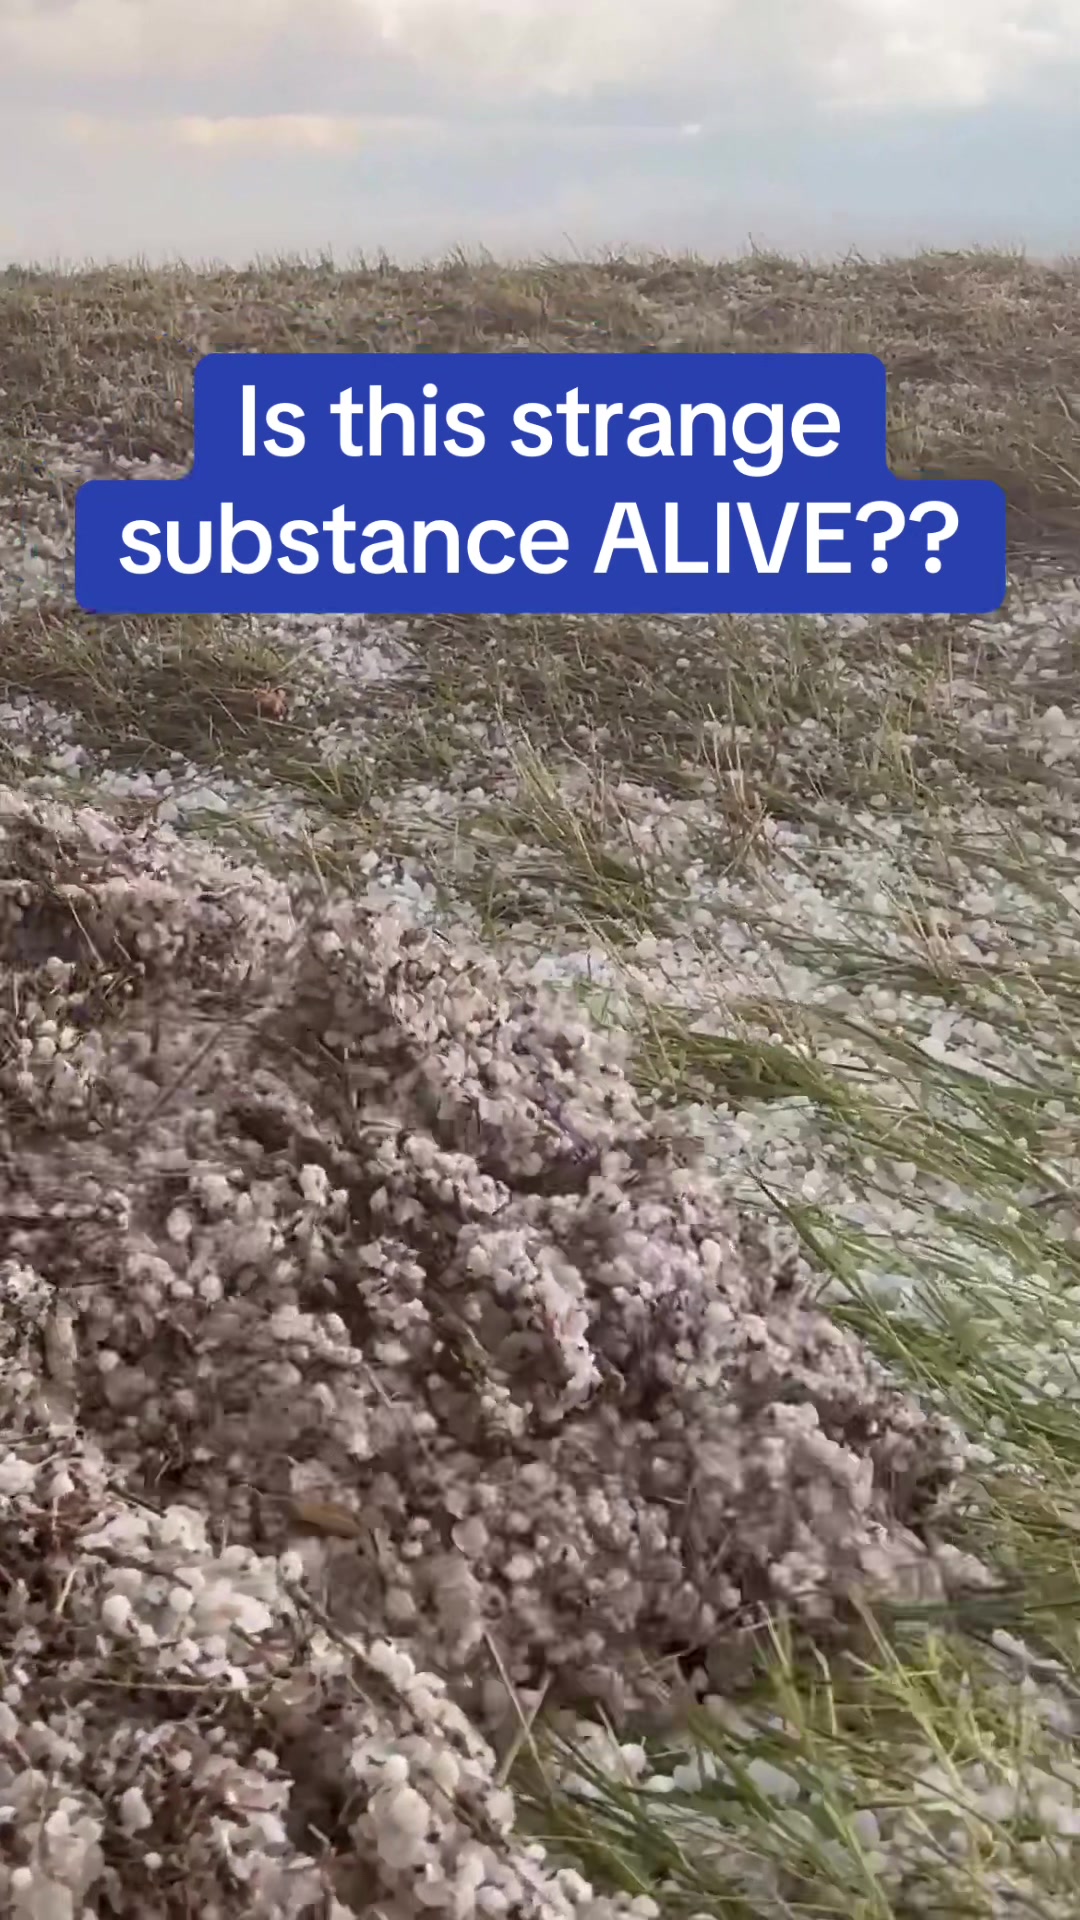 Don't worry it's not alive, this creepy textured substance is actually hail! After severe storms swept across Nebraska, a hail flow was created. What does it remind you of?  🎥 Chad Casey via Storyful  #weather #strange #hail #lava #nebraska #storm